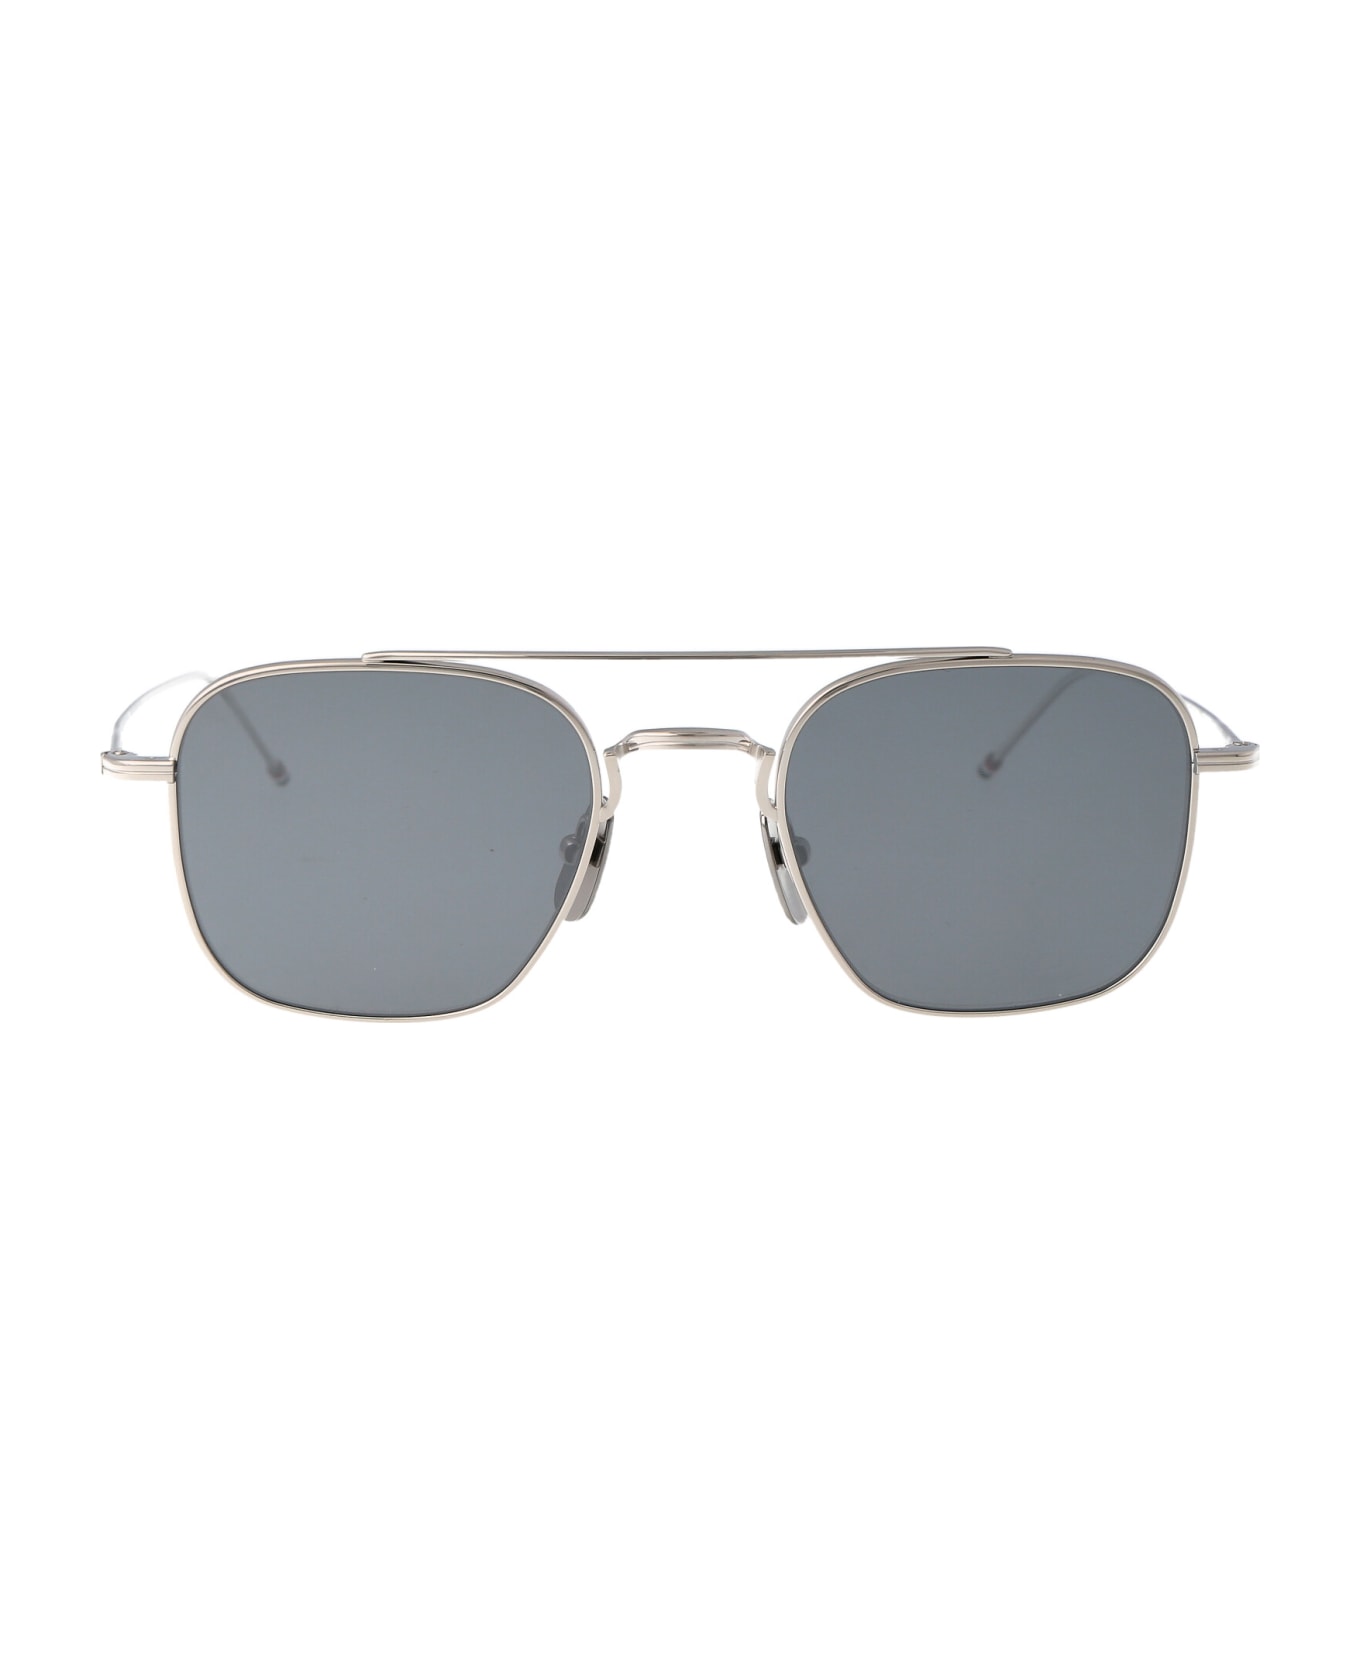 Thom Browne Ues907a-g0001-045-50 Sunglasses - 045 SILVER サングラス